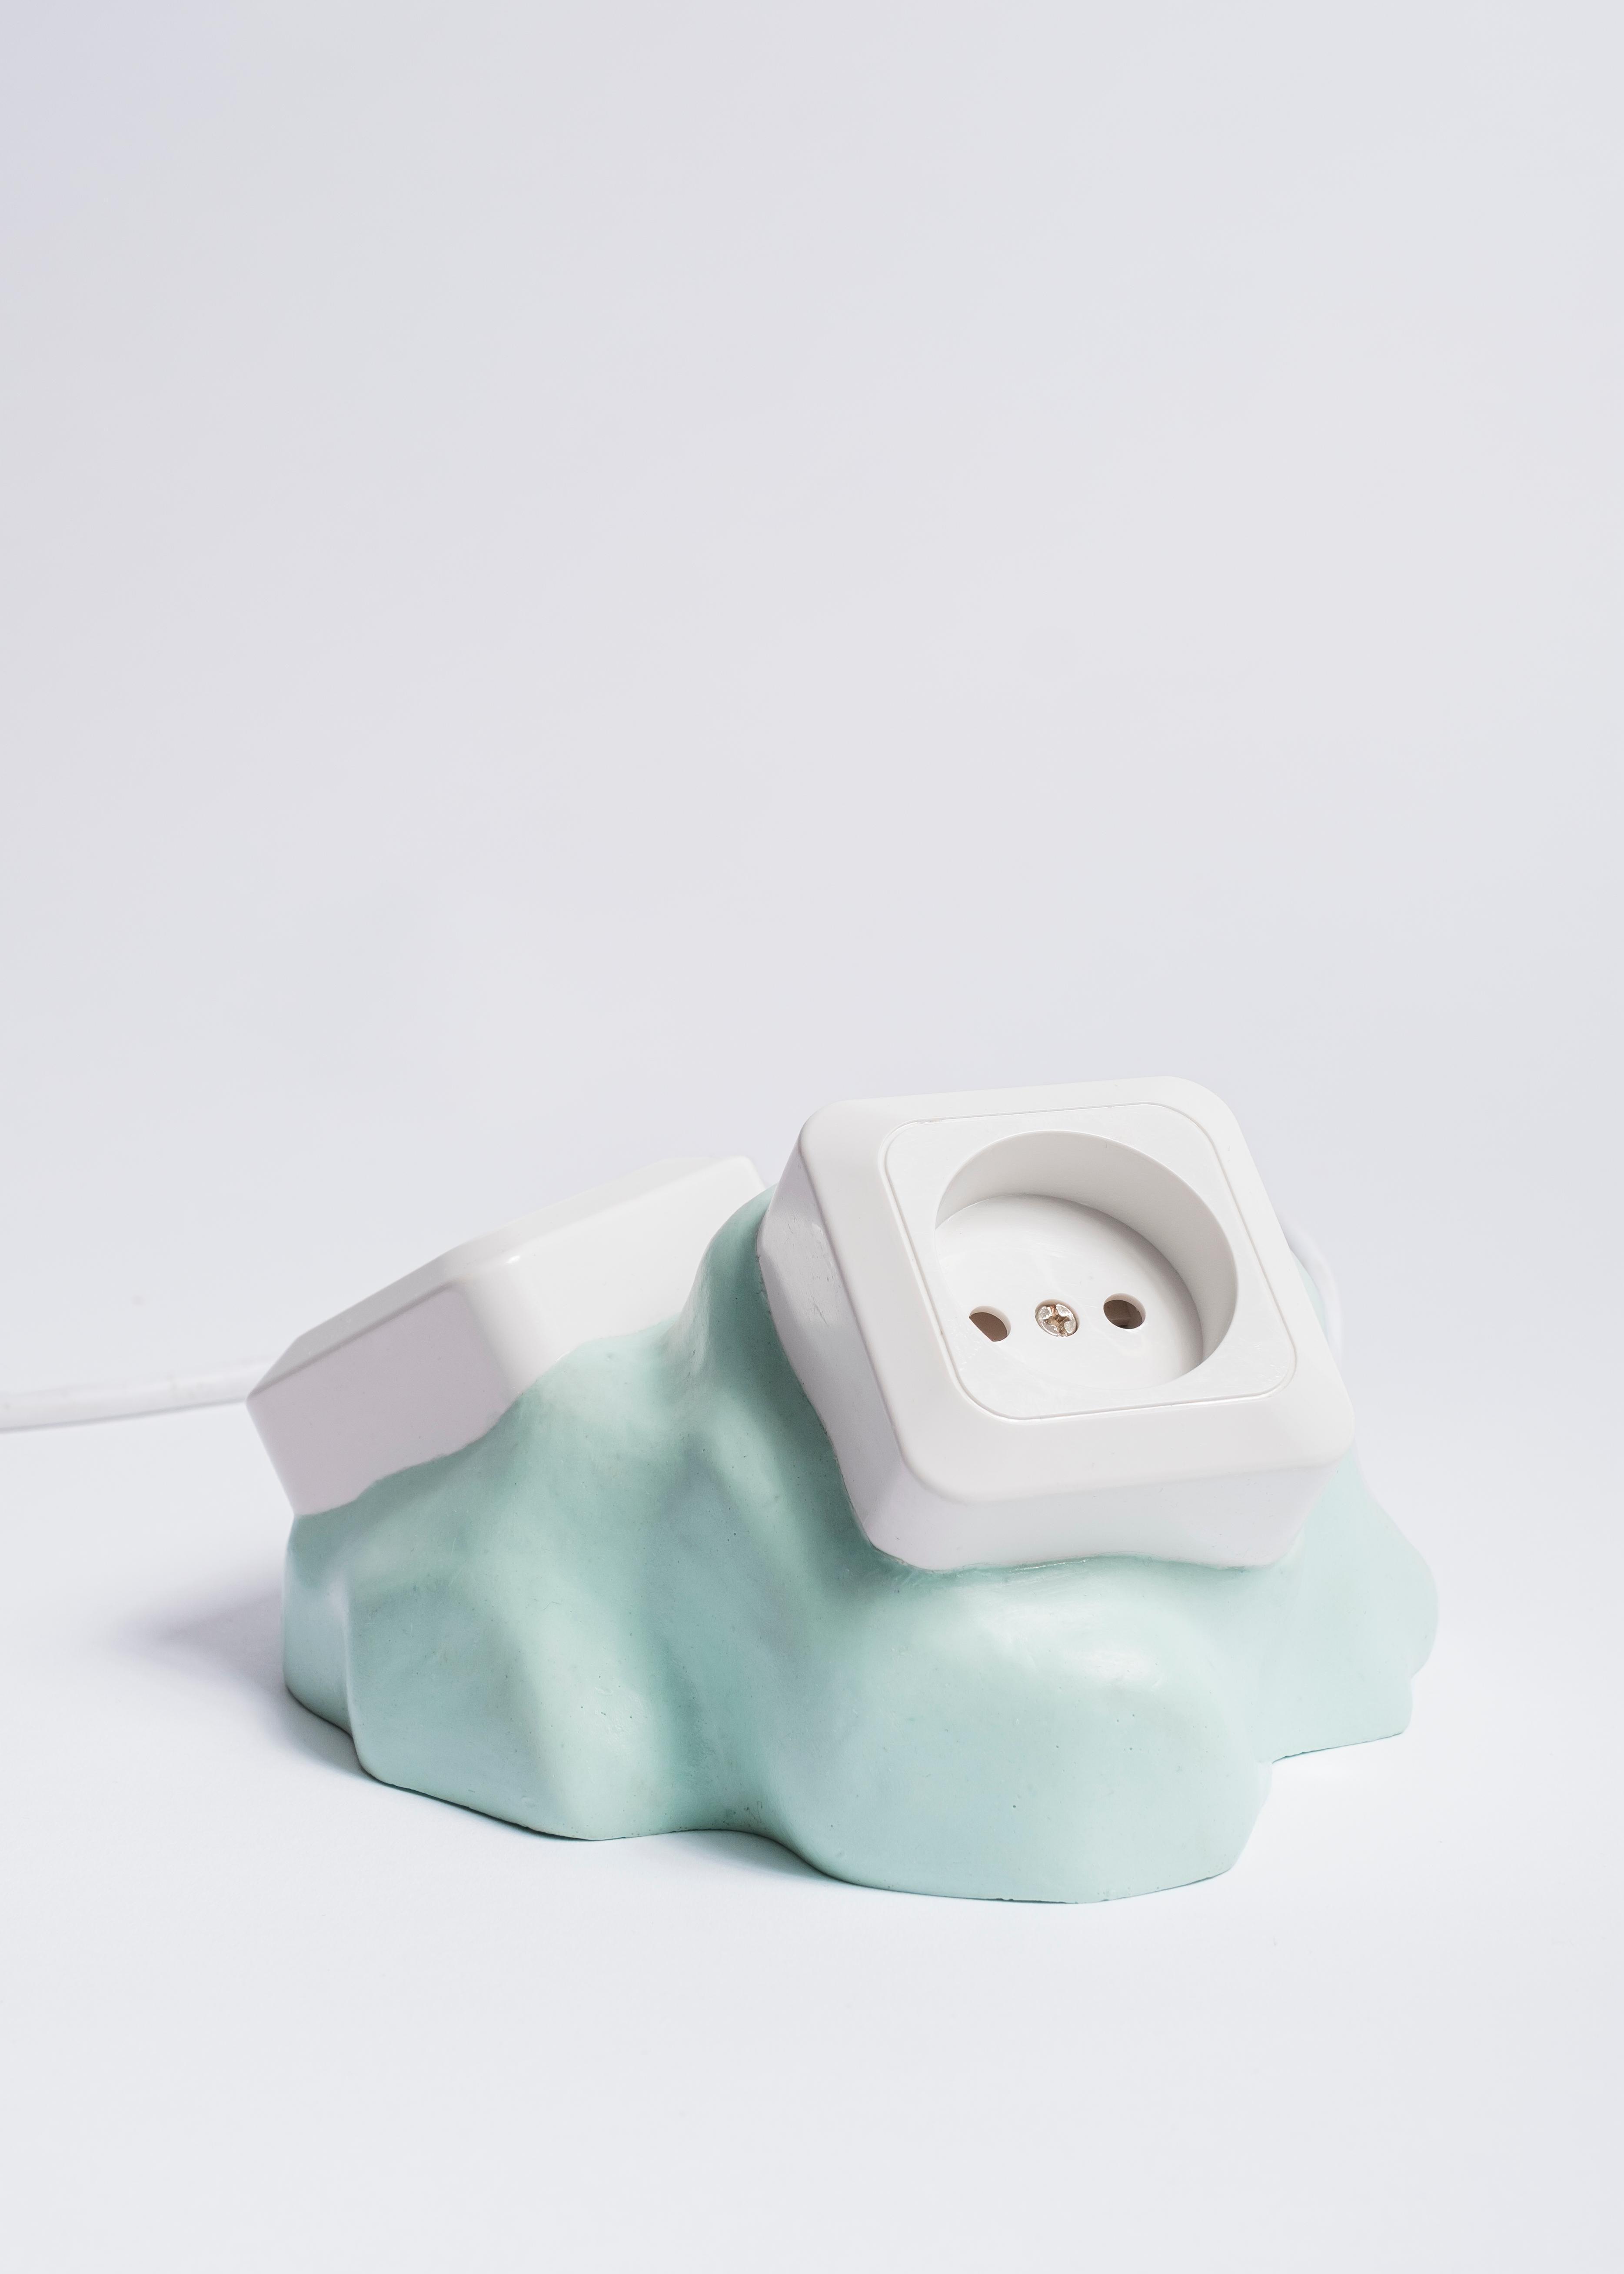 Double socket object 9. Mint SAKER by Studio Gert Wessels, mint. Hand crafted in an organic shape and made in his studio in the Netherlands. 

In his daily practice he investigates the relationship between form and function. The result is a range